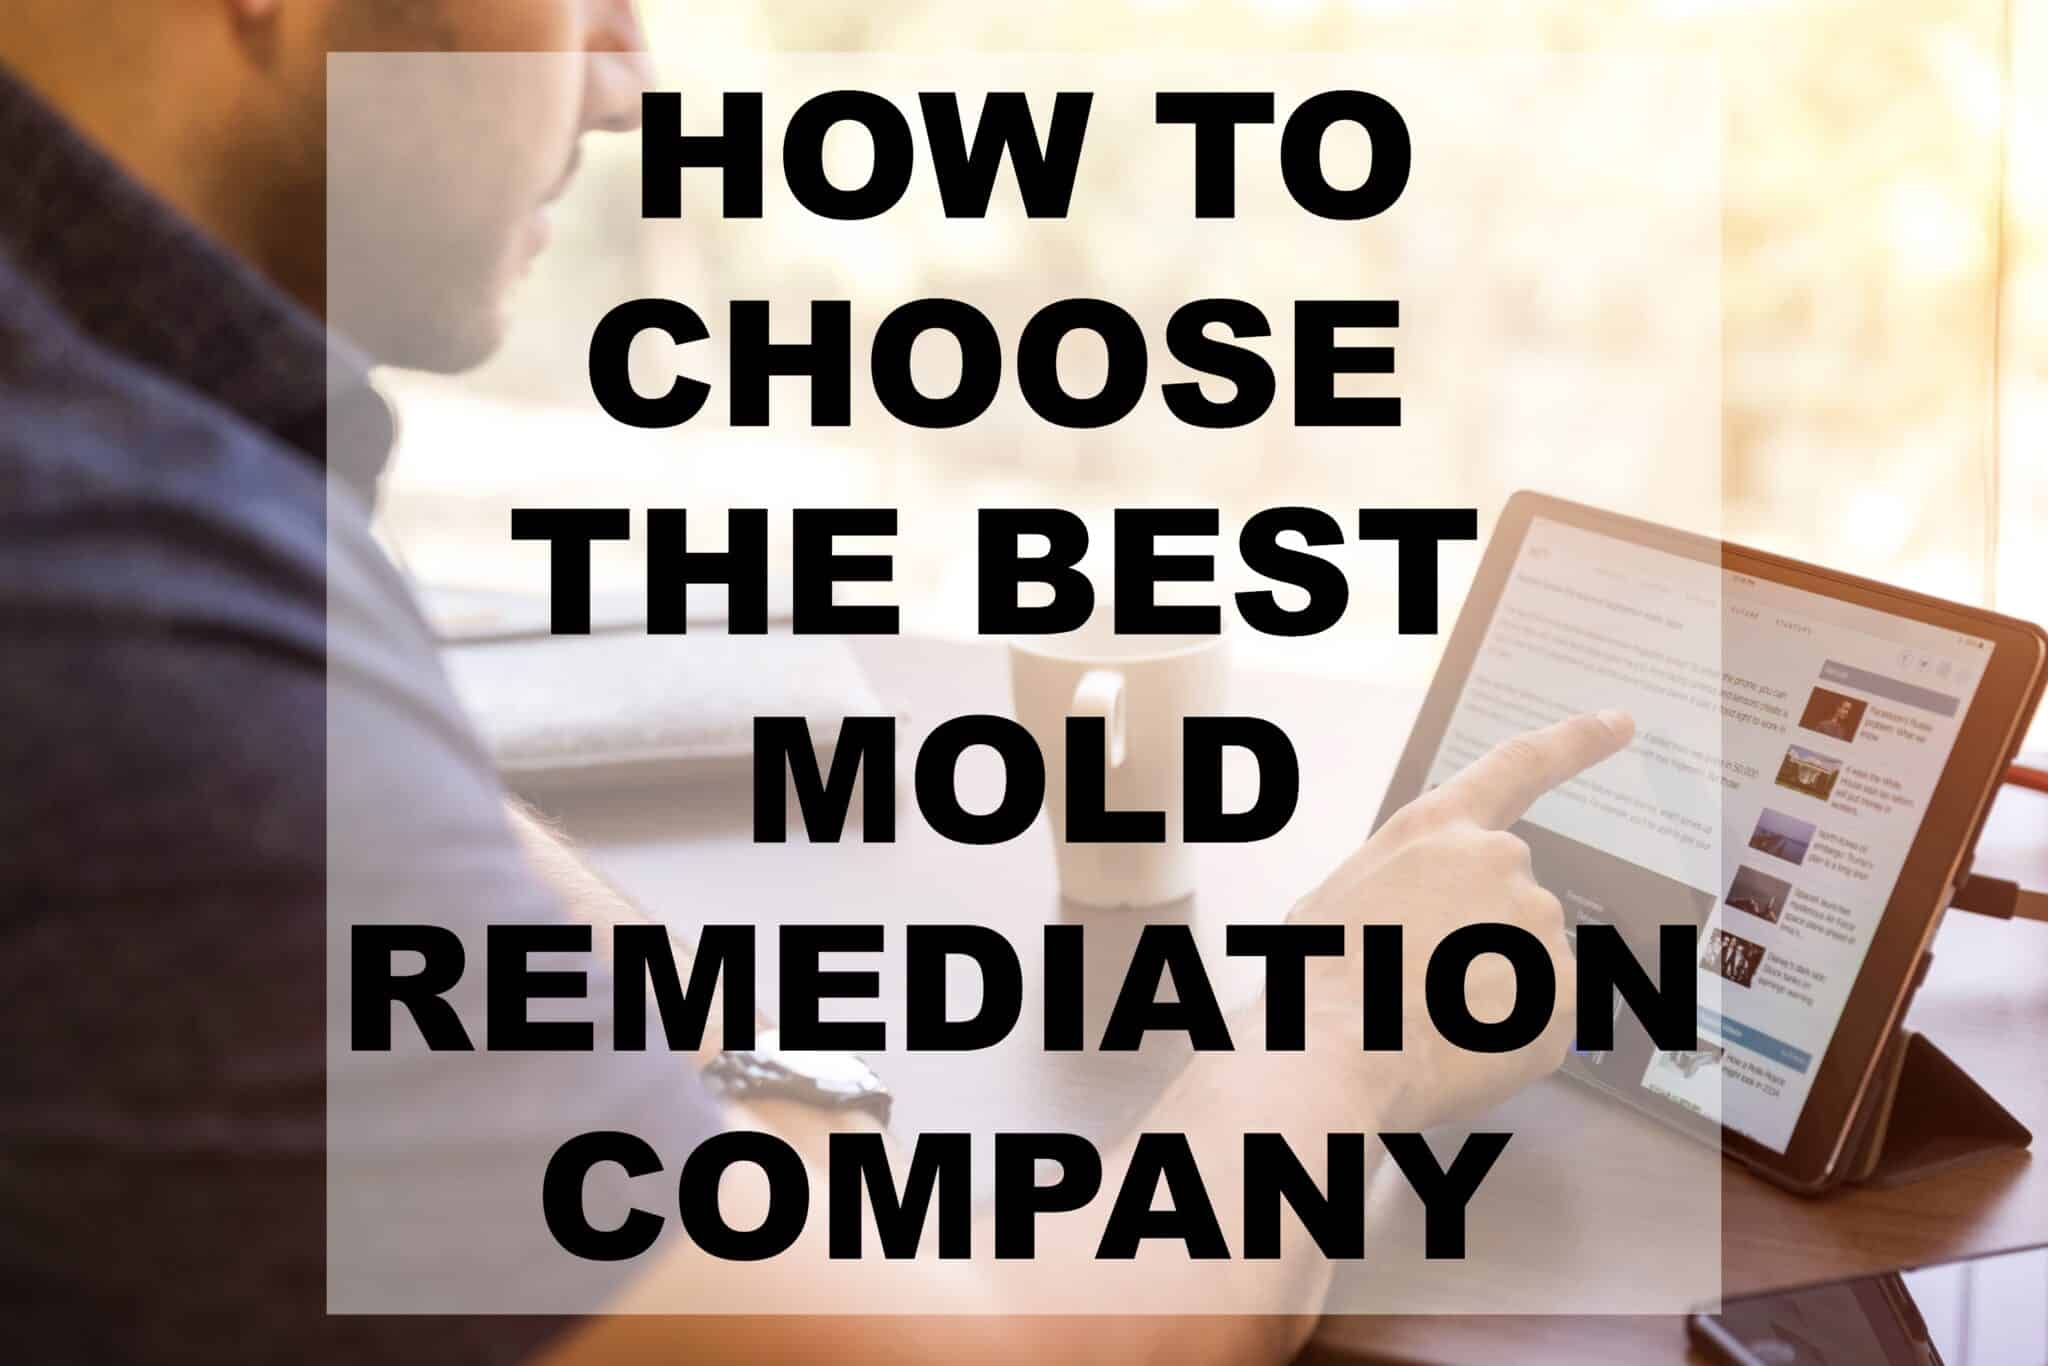 How to Choose the Best Mold Remediation Company